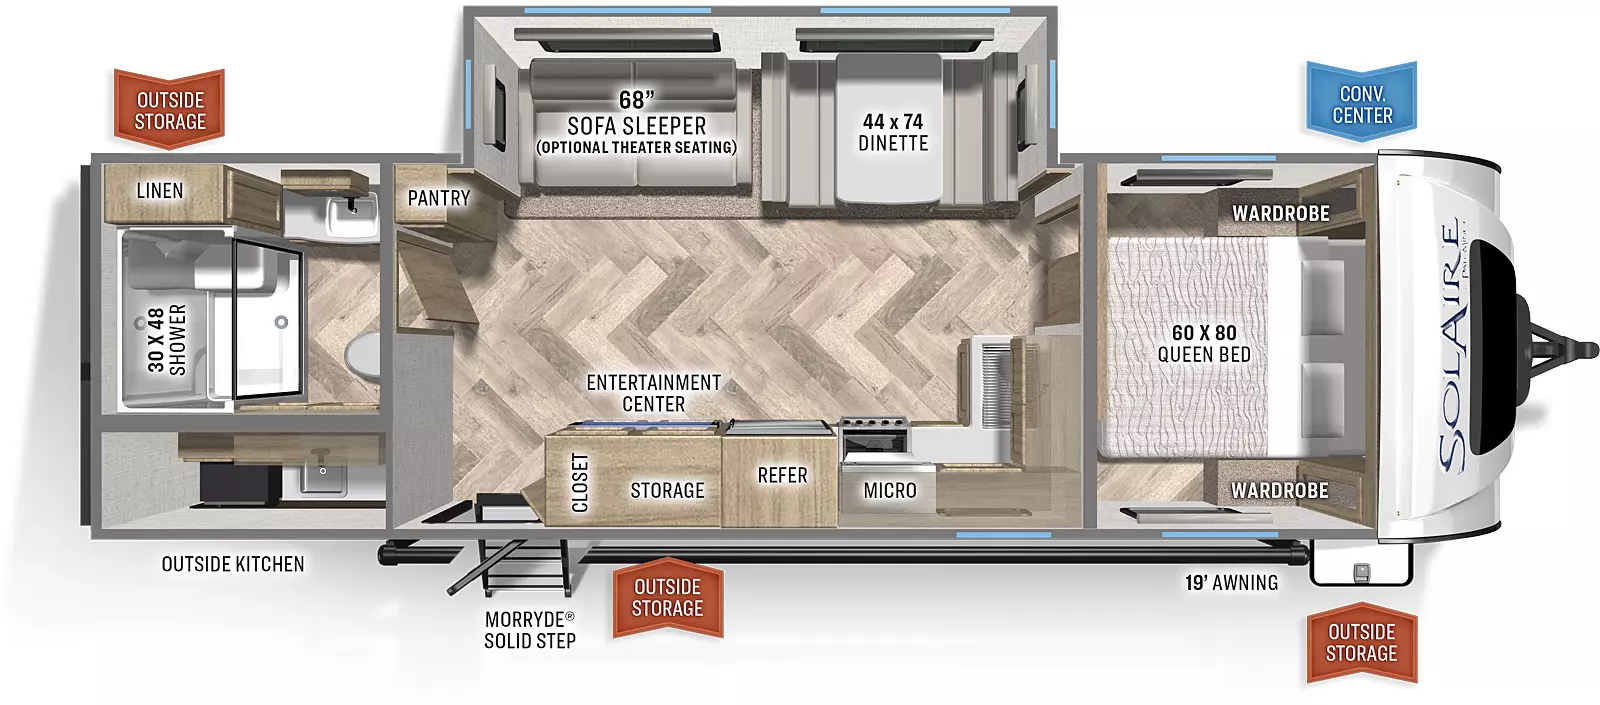 The SolAire Ultra Lite 258RBSS includes an entry door on the camp side, one slideout on roadside, and an outside kitchen with refrigerator; inside is a bathroom with a toilet, a 30 x 48 shower with seat, and a sink; the dining area includes a 68" theater sofa sleep and a 44 x 74 dinette booth; the bedroom area includes 2 wardrobes on either side of the 70 x 80 king bed; the kitchen includes a sink with overhead storage, a stove and cooktop with an overhead microwave, a refrigerator, and an entertainment center with closet and storage. 